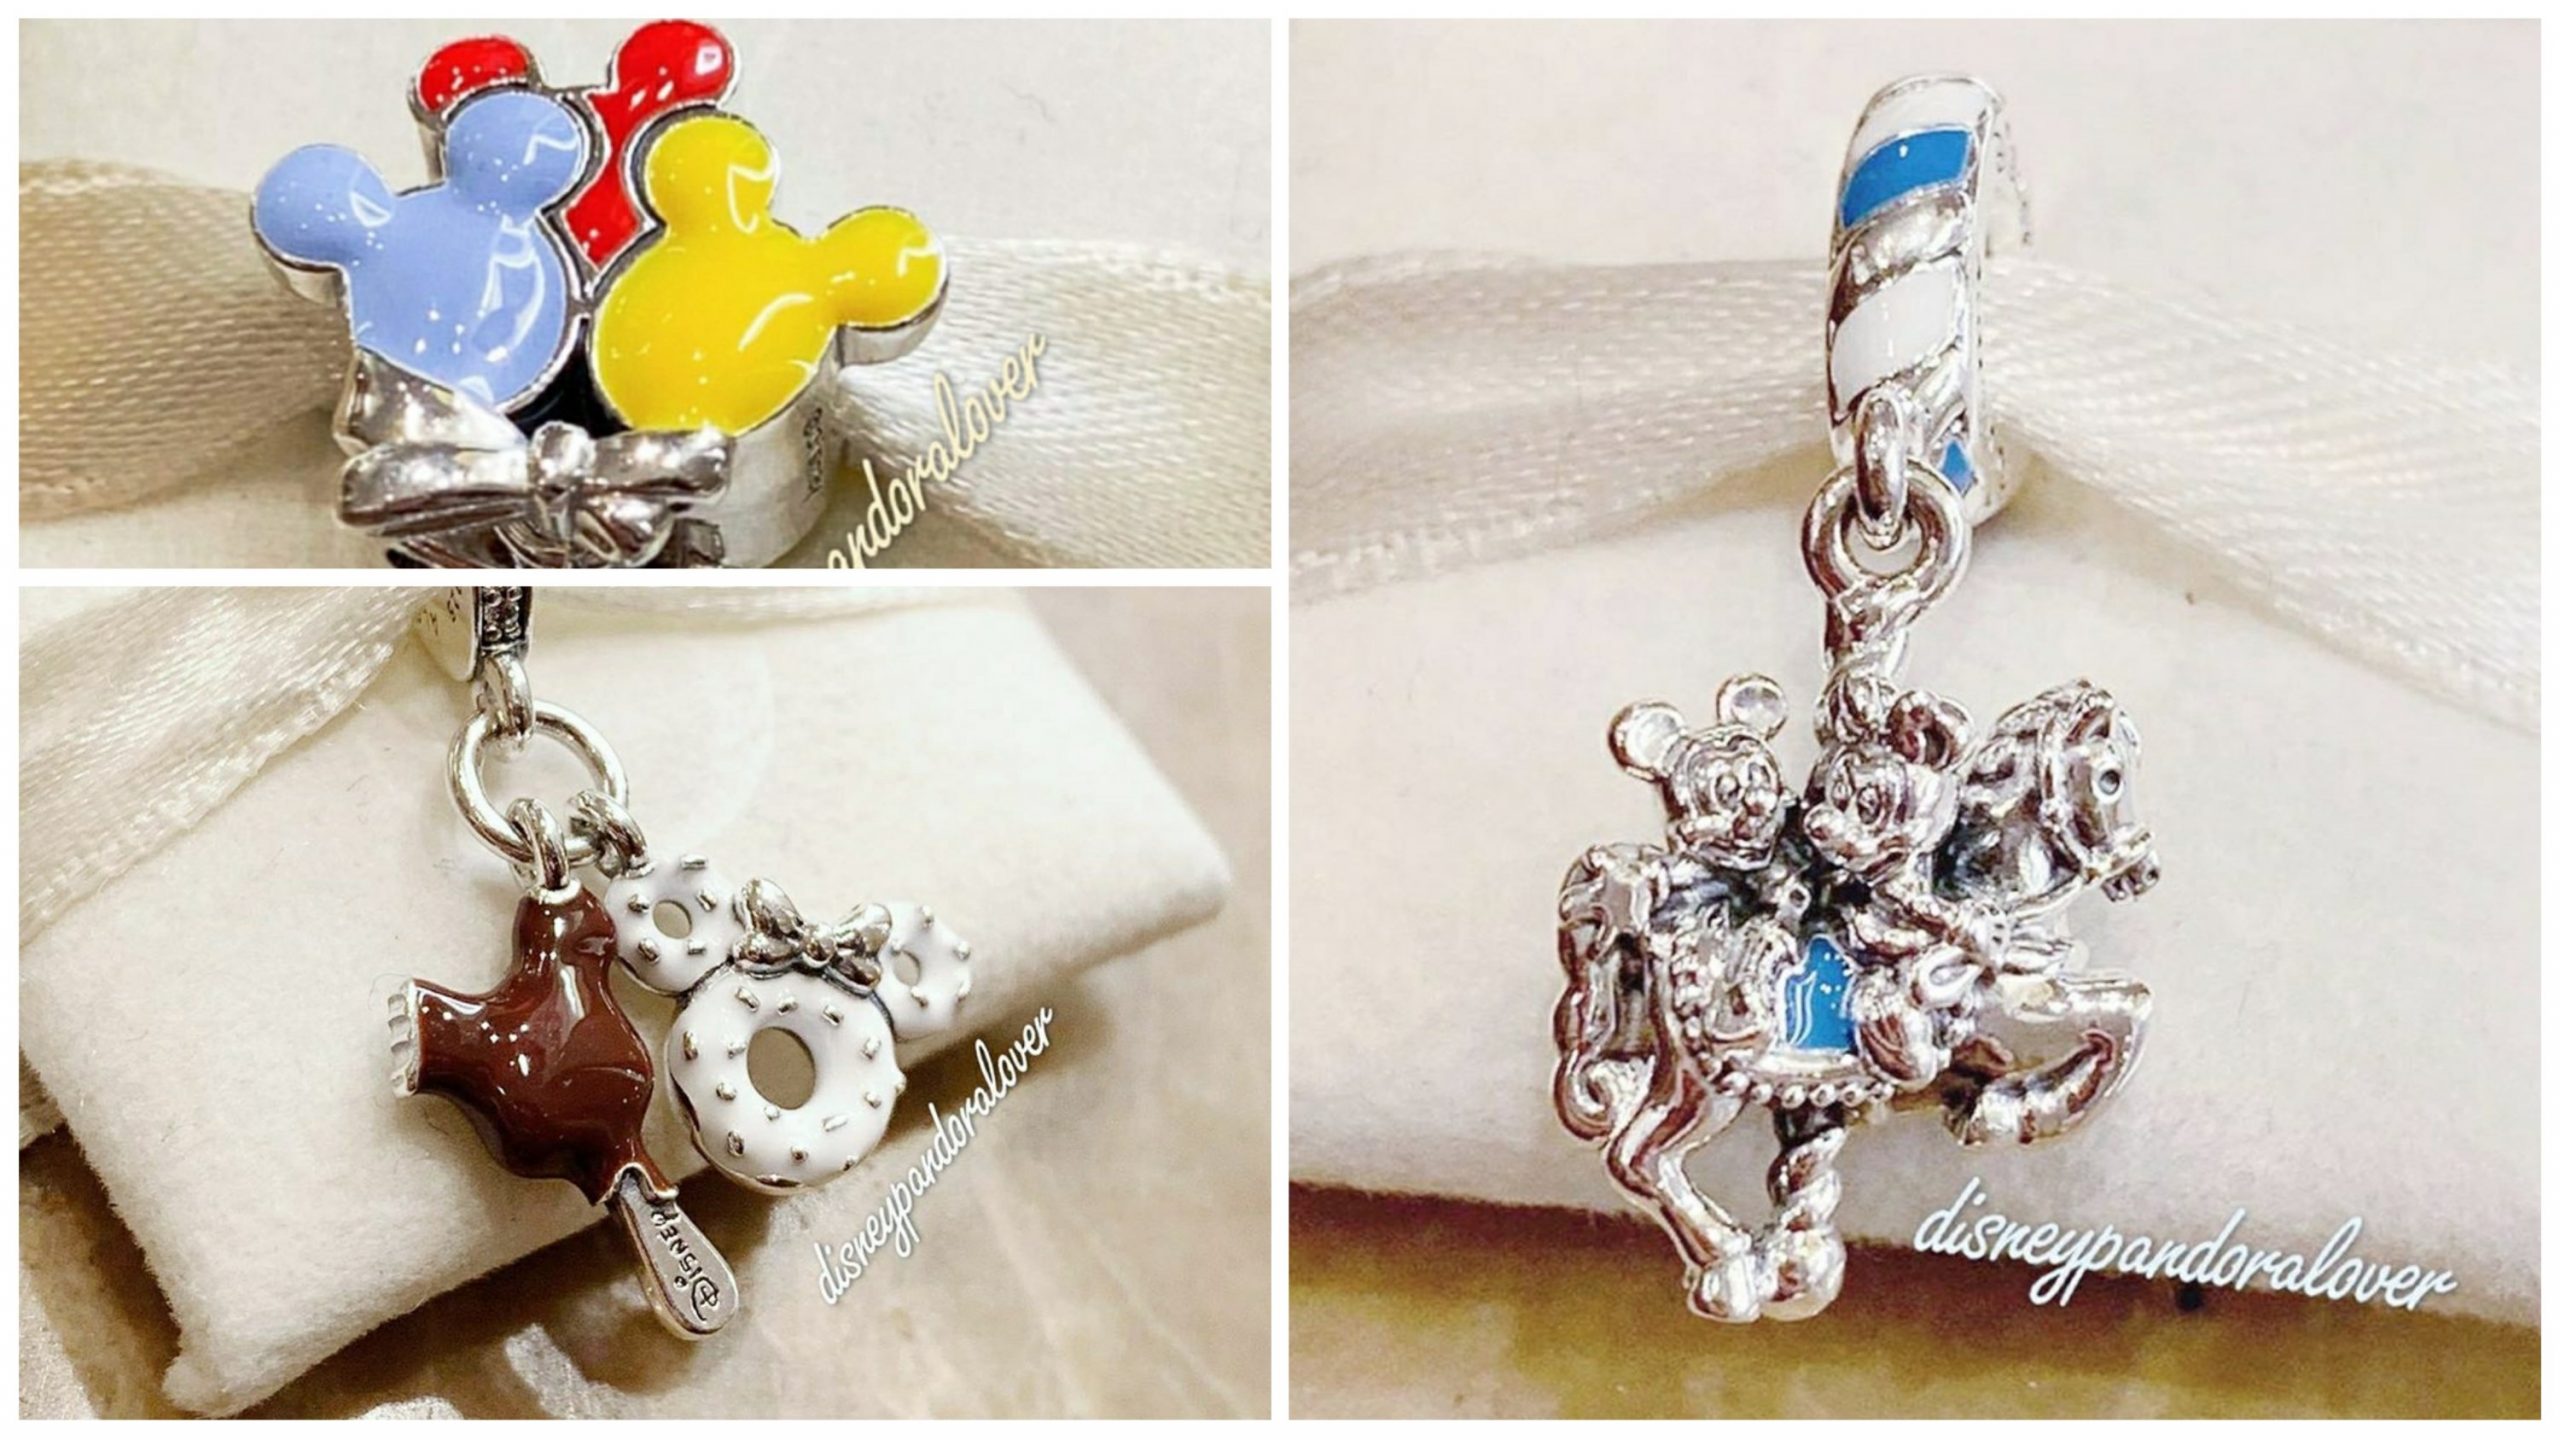 New 2020 Disney Park Exclusive Pandora Charms Coming To Celebrate ...